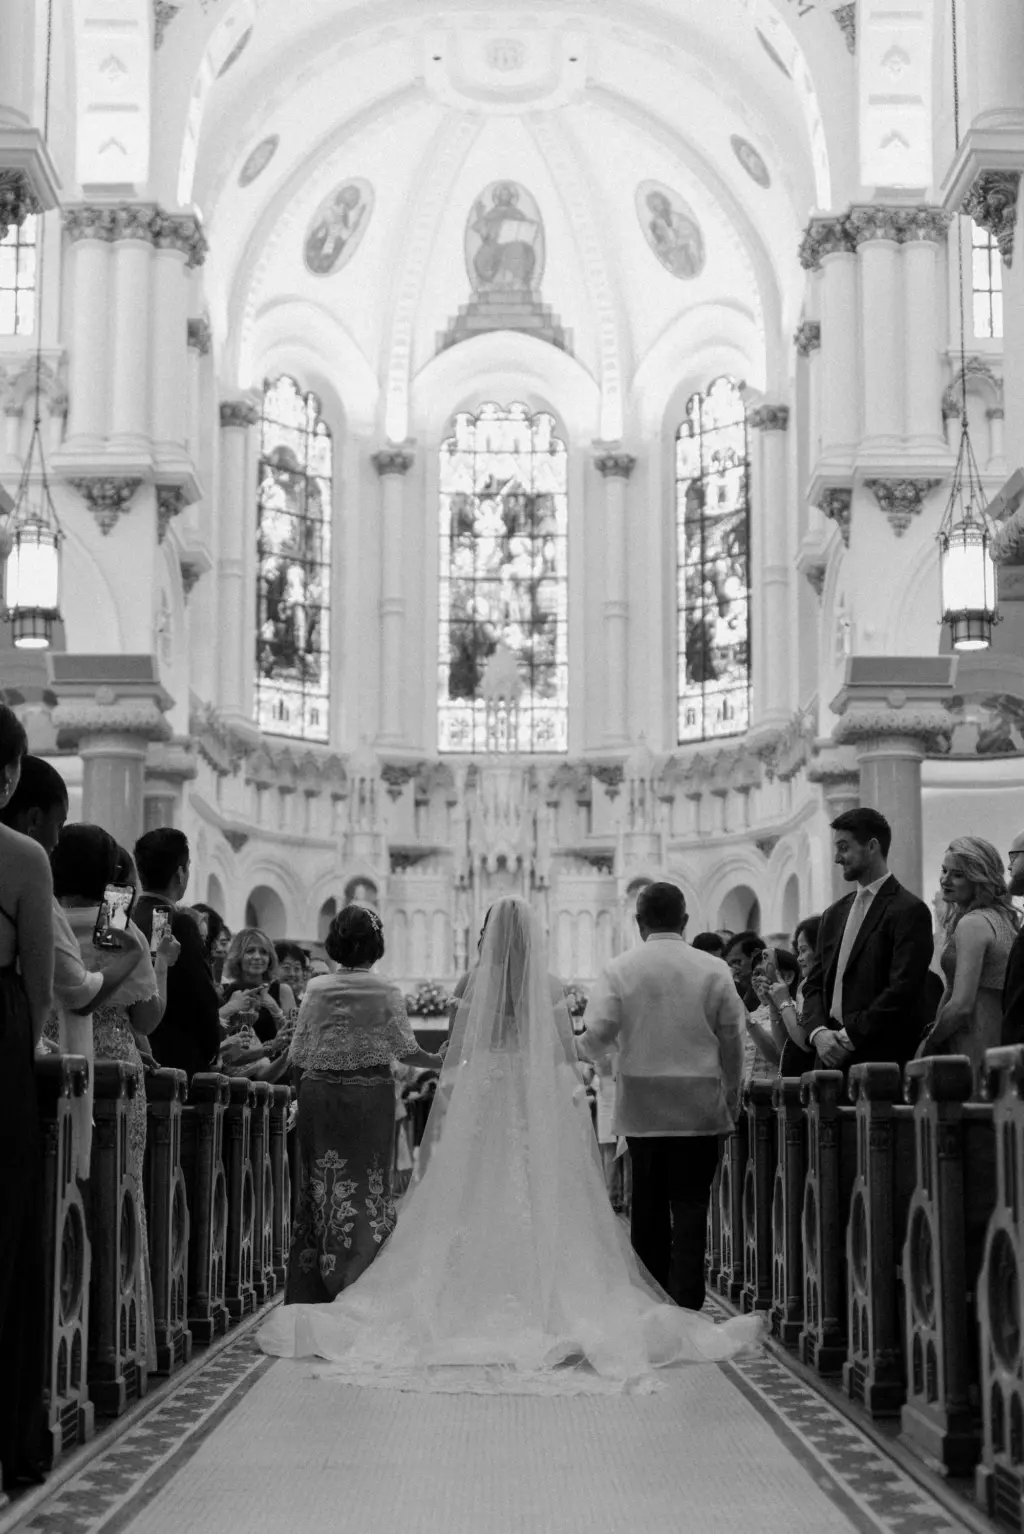 Father of the Groom Walks Bride Down the Aisle in Church Wedding Black and White Wedding Portrait | Tampa Church Ceremony Sacred Heart Catholic Church